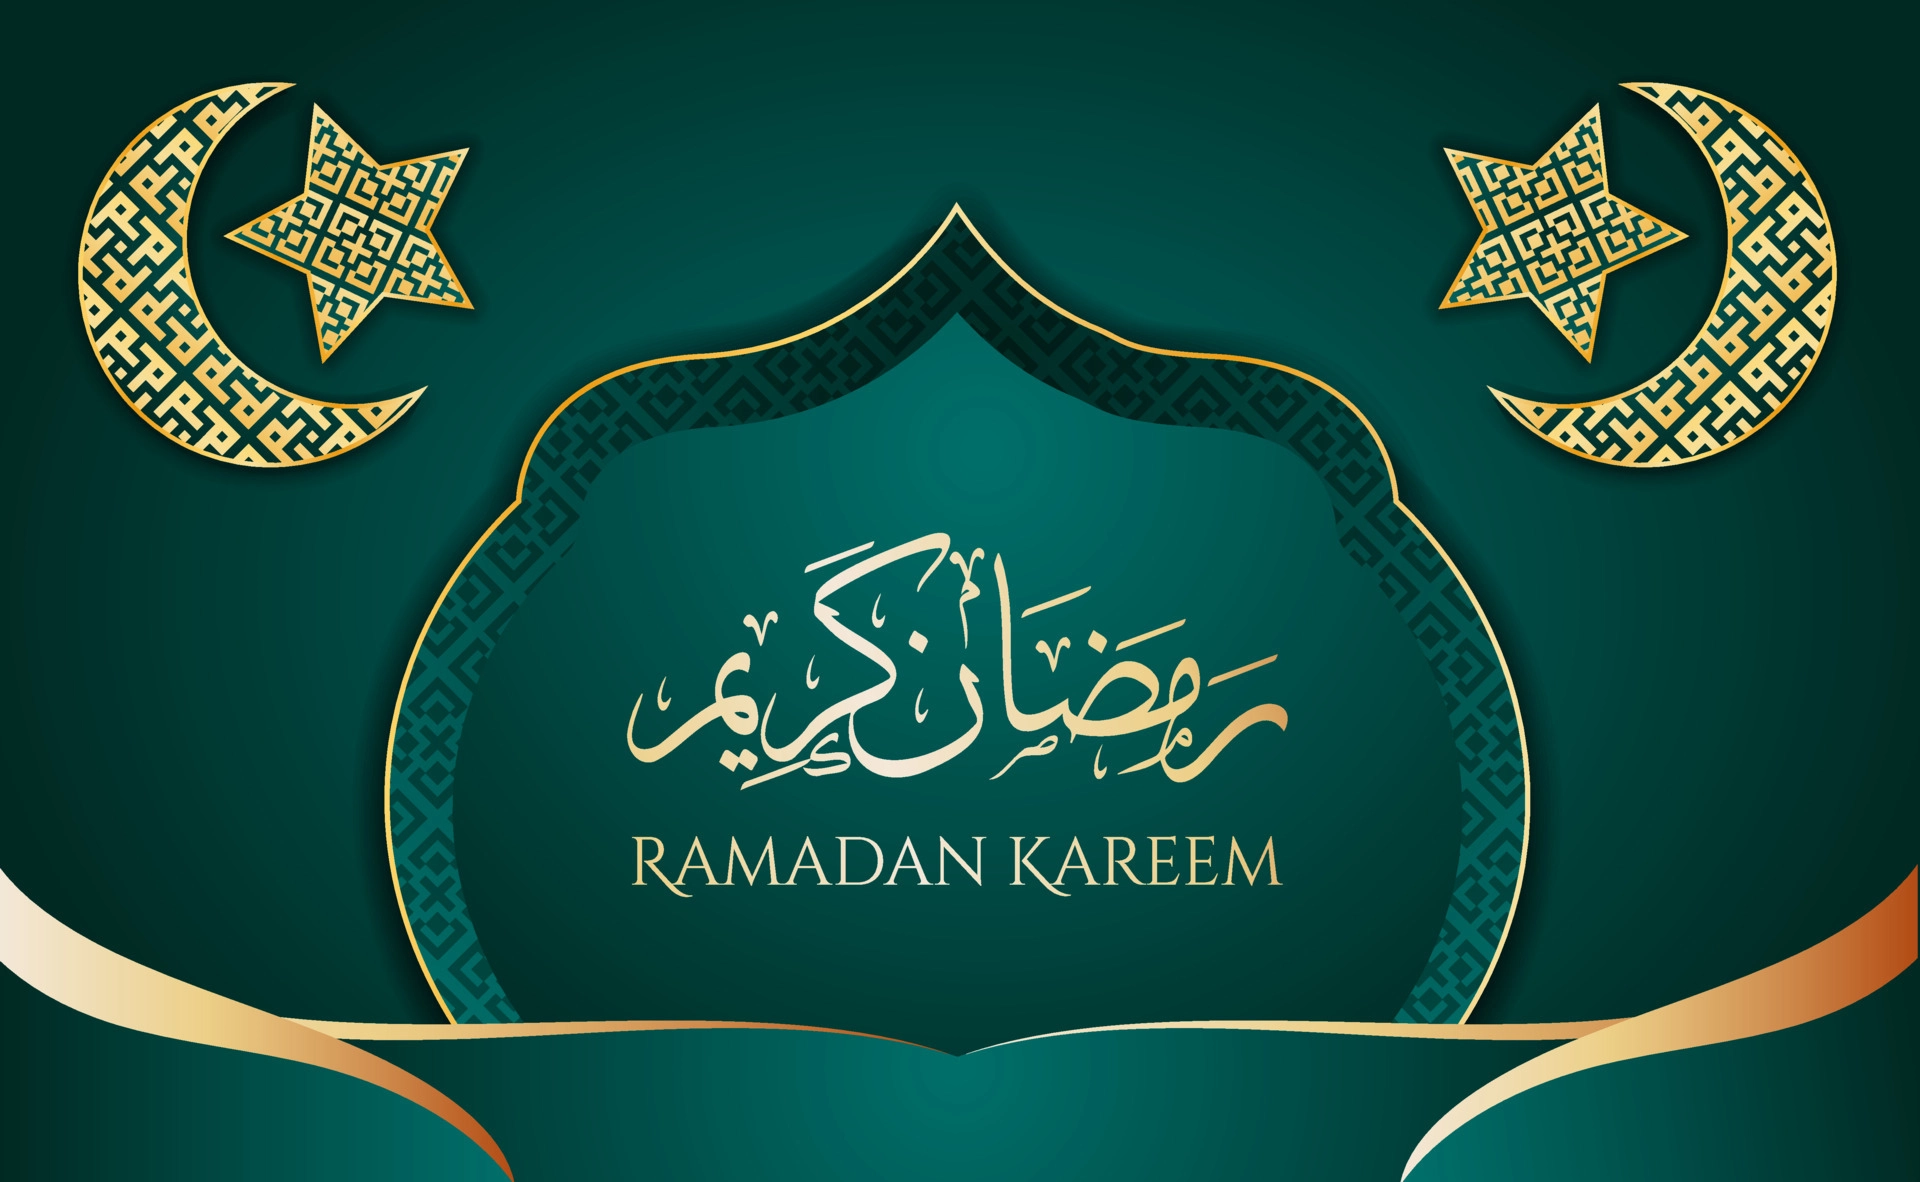 Ramadan Kareem Beautiful Greeting Card With Arabic Calligraphy Which Means Ramadan Kareem Islamic Background With Islamic Ornament And Mosaic Pattern Suitable Also For Eid Mubarak Free Vector